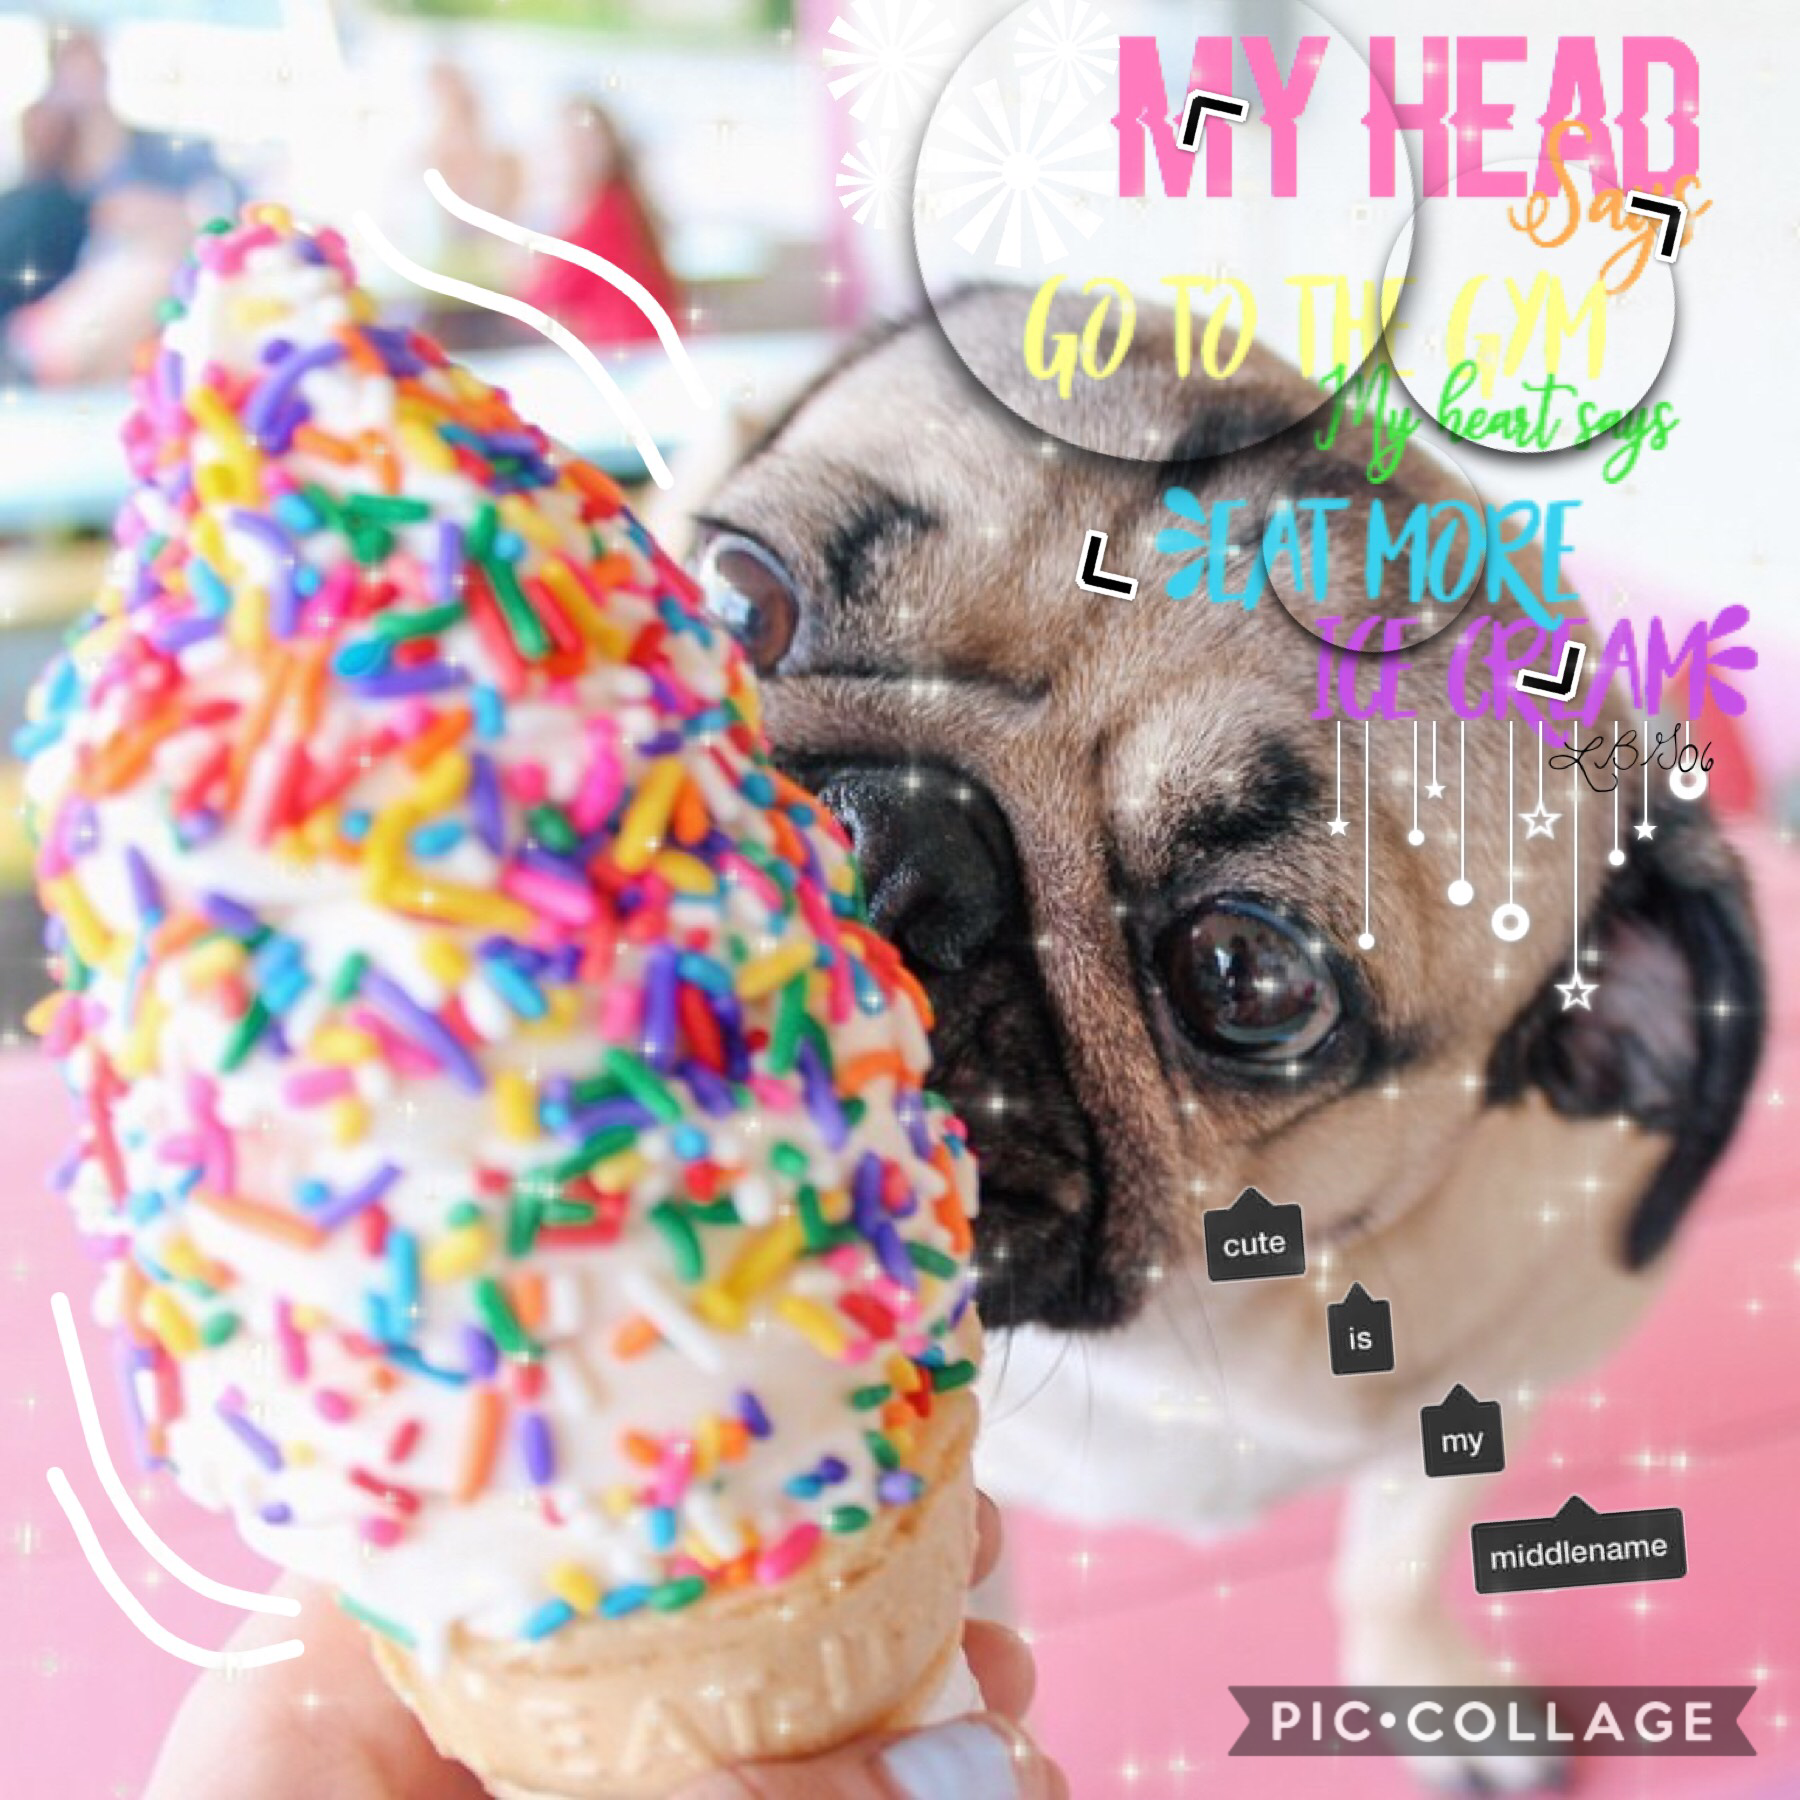 🍦tappy🍦

Is this you? This is me 😂

QOTD: fav flavor ice cream?
AOTD: CHOCOLATE 4 LIFE 🍦🍦🍦🍫🍫🍫

Xoxo❤️❤️❤️❤️